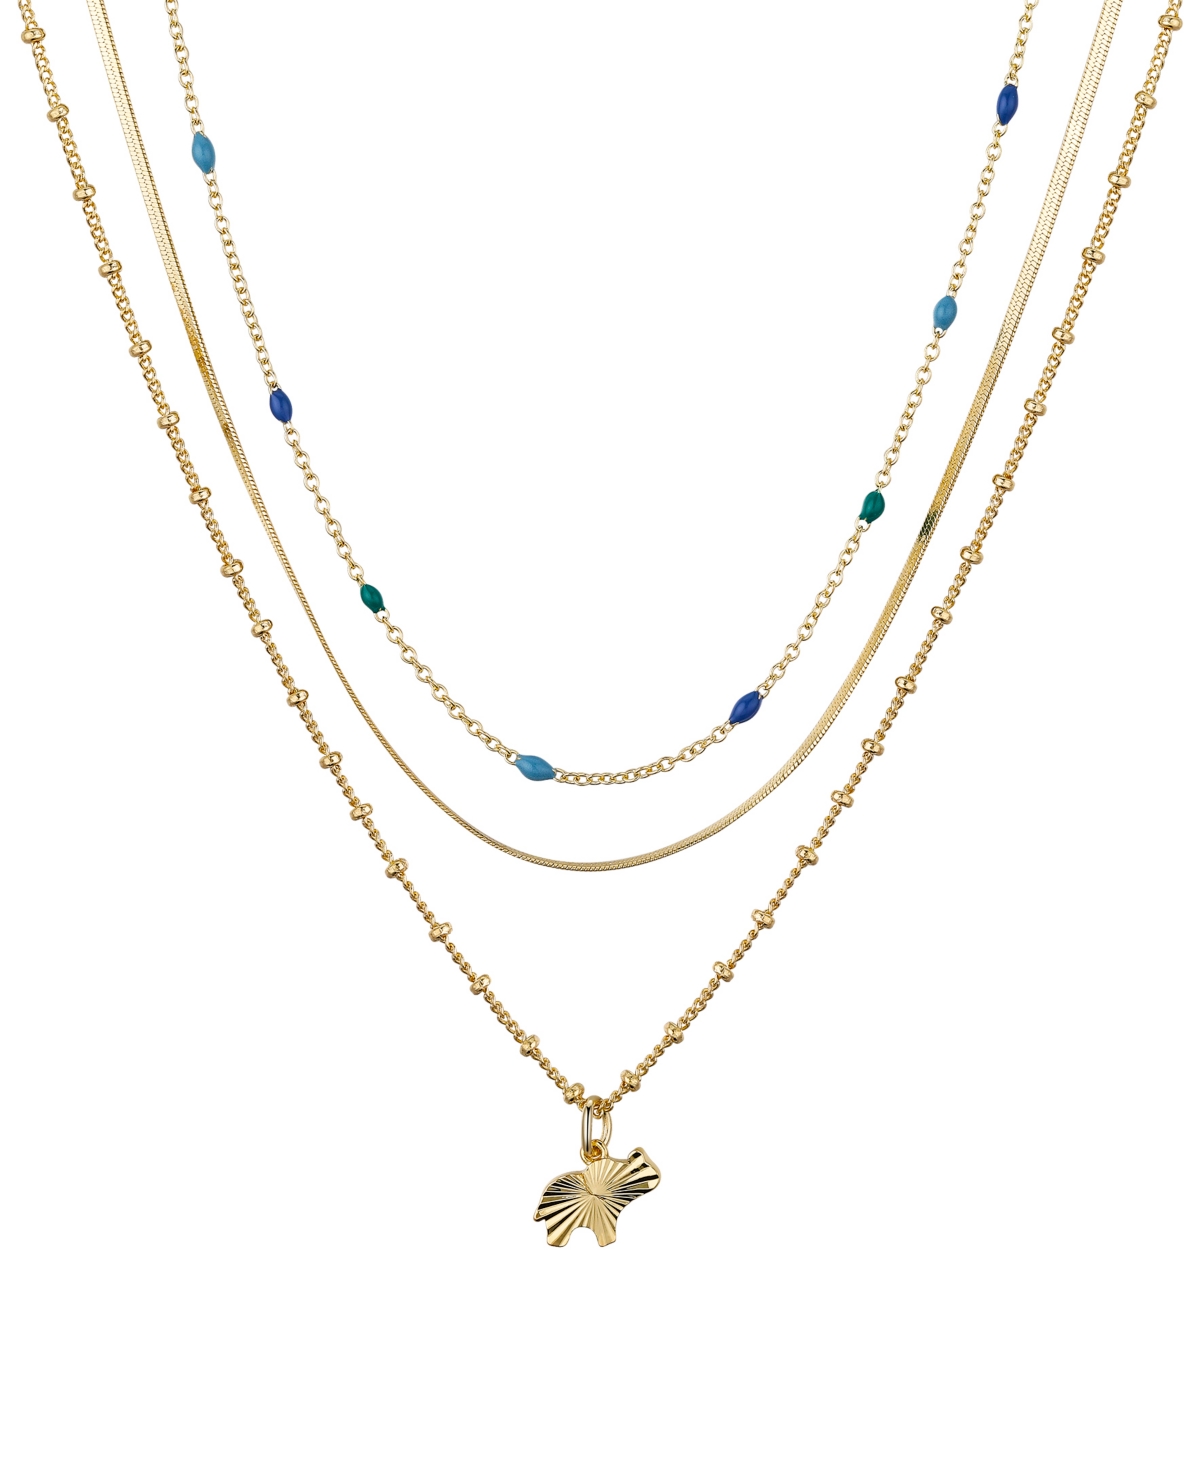 Unwritten 14k Gold Plated Elephant And Blue Enamel Beads Layered Necklace Set, 3 Pieces